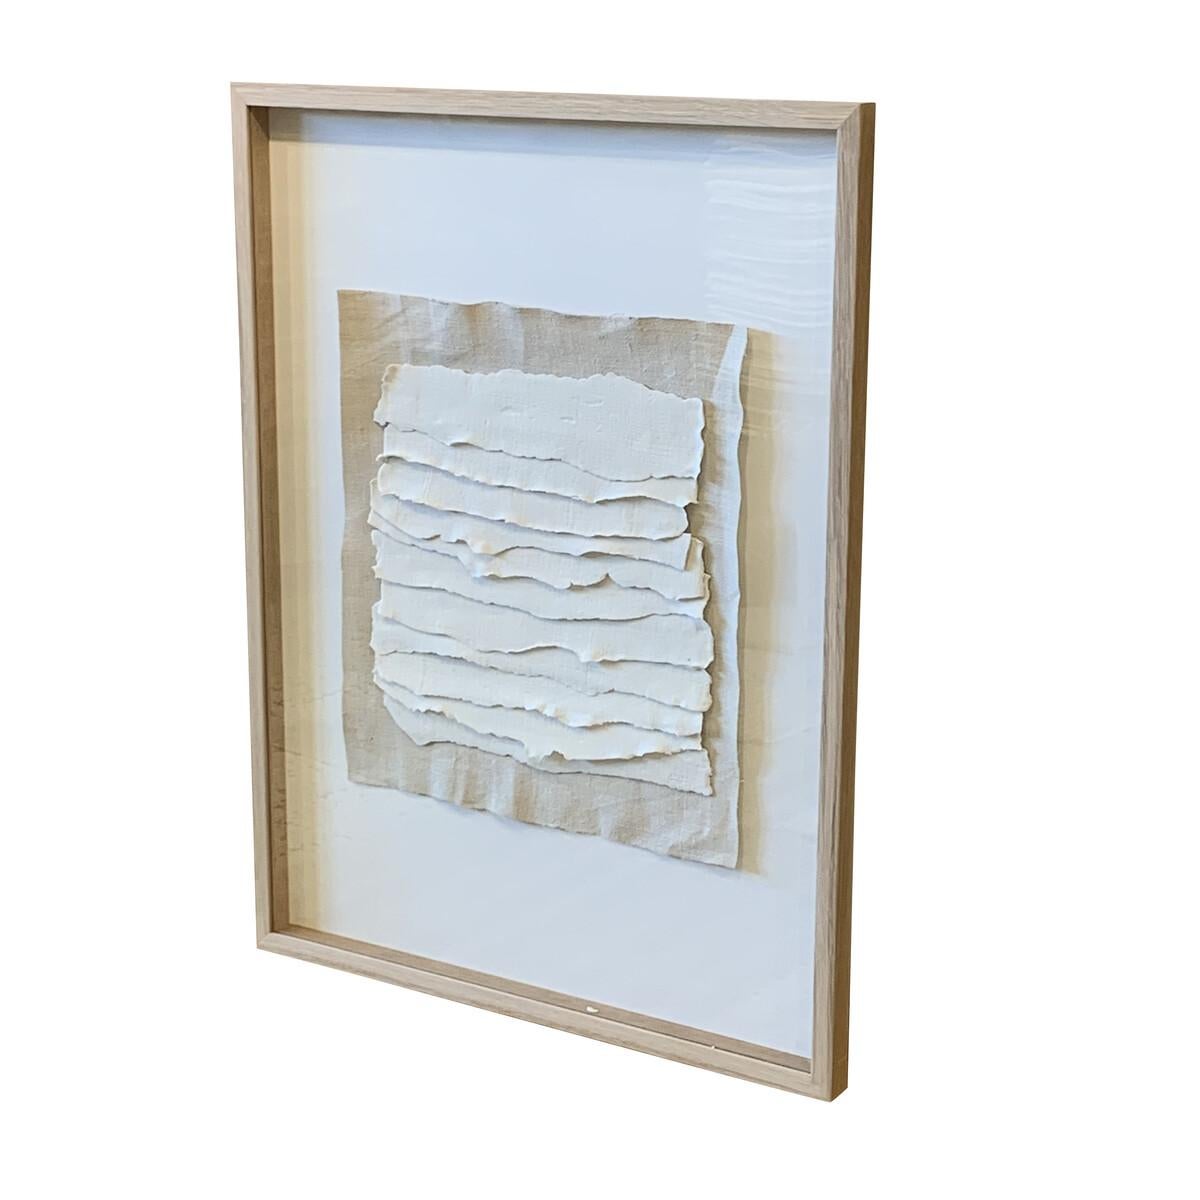 Contemporary French handmade and free formed strips of linen textured porcelain framed in light oak frames.
The porcelain pieces are mounted on linen.
Two framed pieces available (P1276A).
Sold individually.